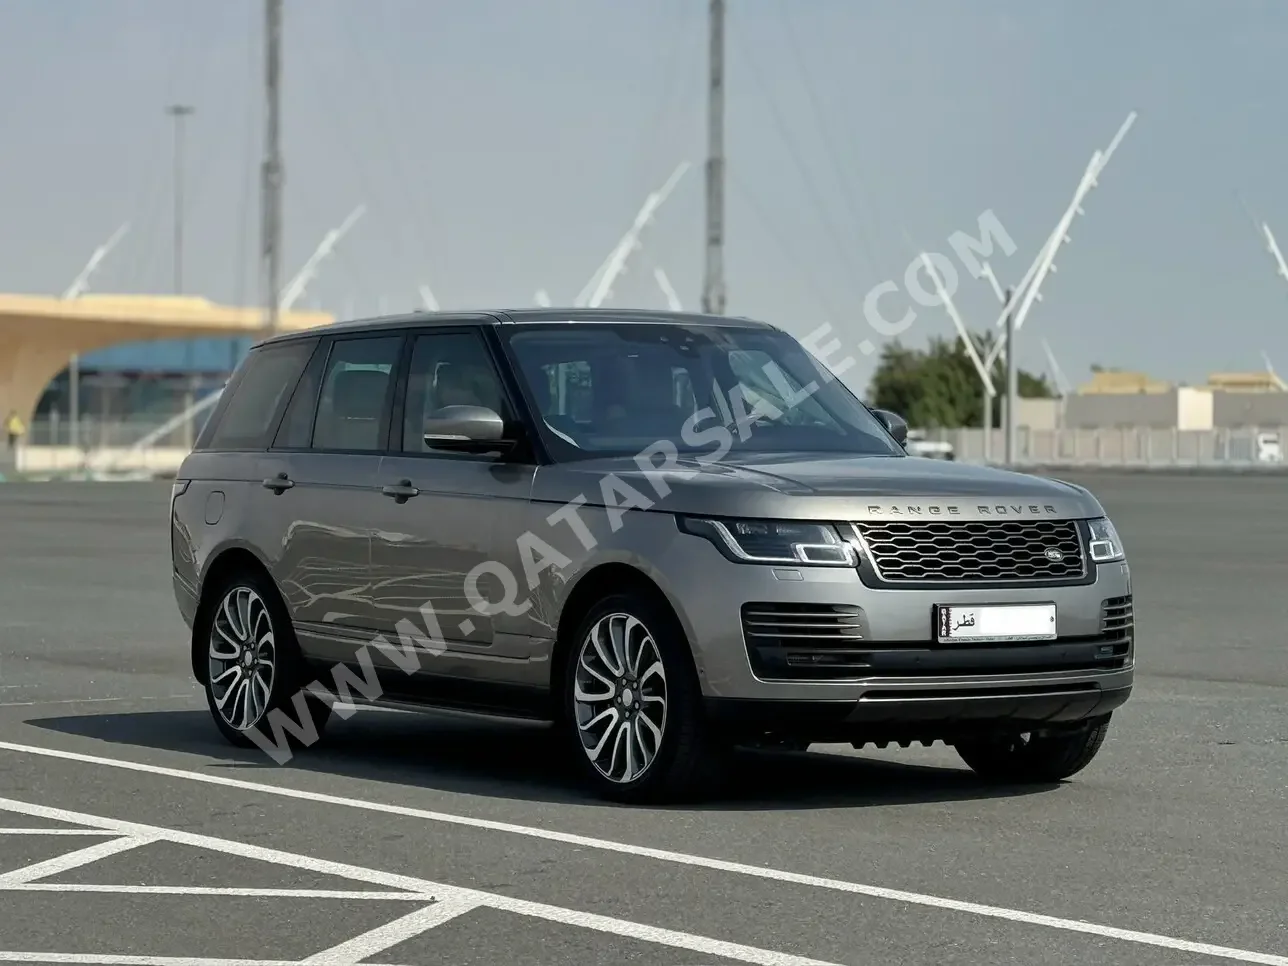 Land Rover  Range Rover  Vogue HSE  2018  Automatic  30,000 Km  6 Cylinder  Four Wheel Drive (4WD)  SUV  Gray